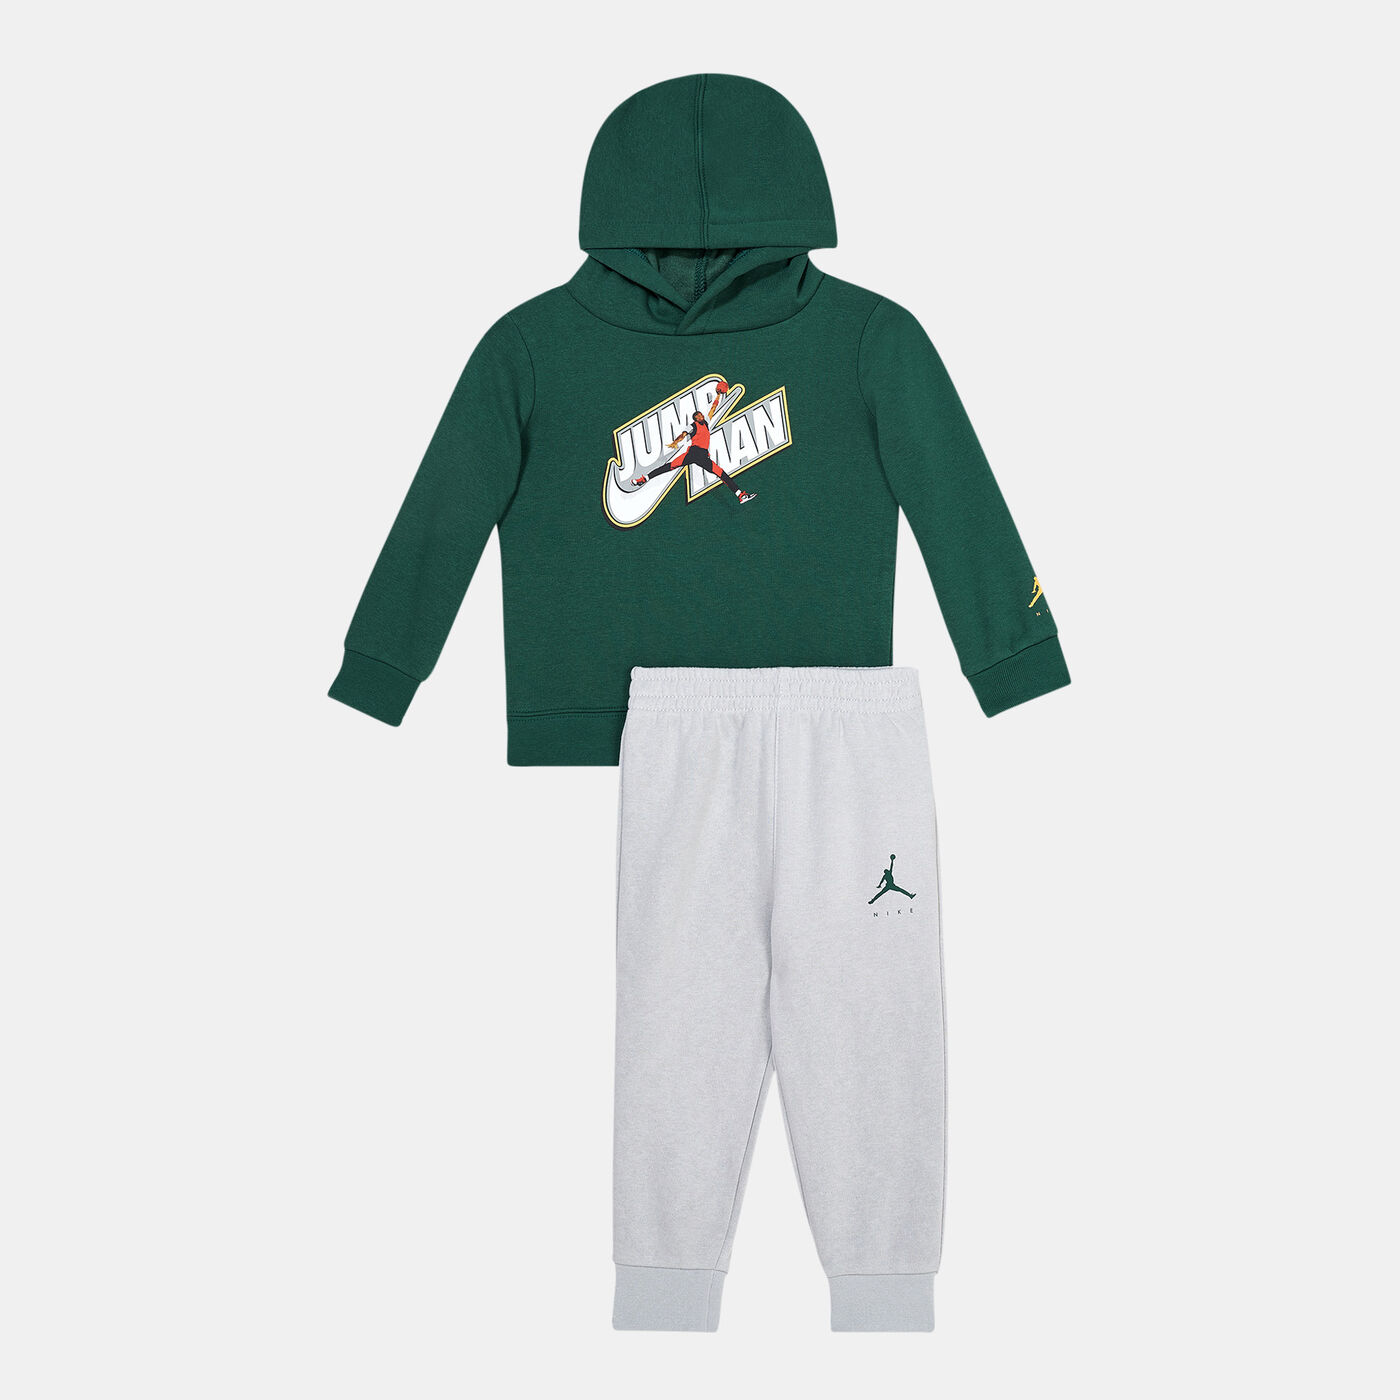 Kids' Hoodie and Sweatpants Set (Baby And Toddler)